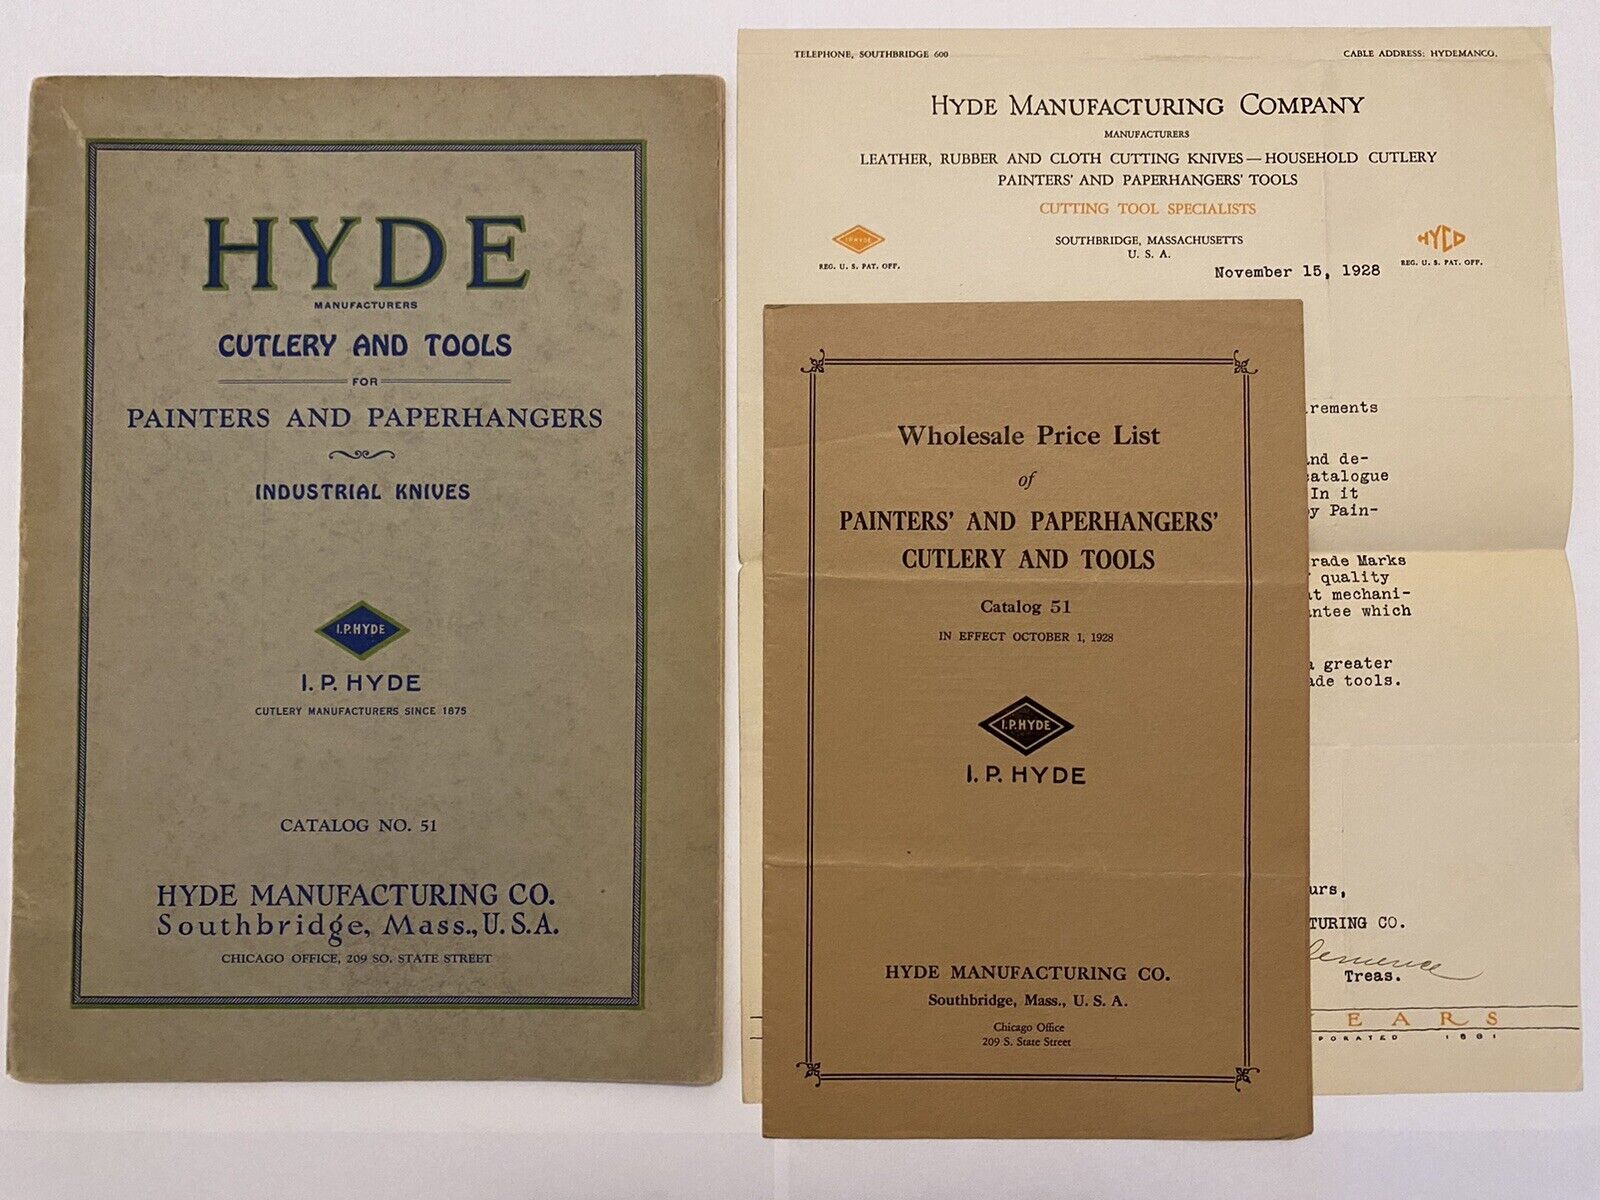 HYDE CUTLERY & TOOLS - 1928 CATALOG No. 51 - WITH PRICE LIST & LETTER